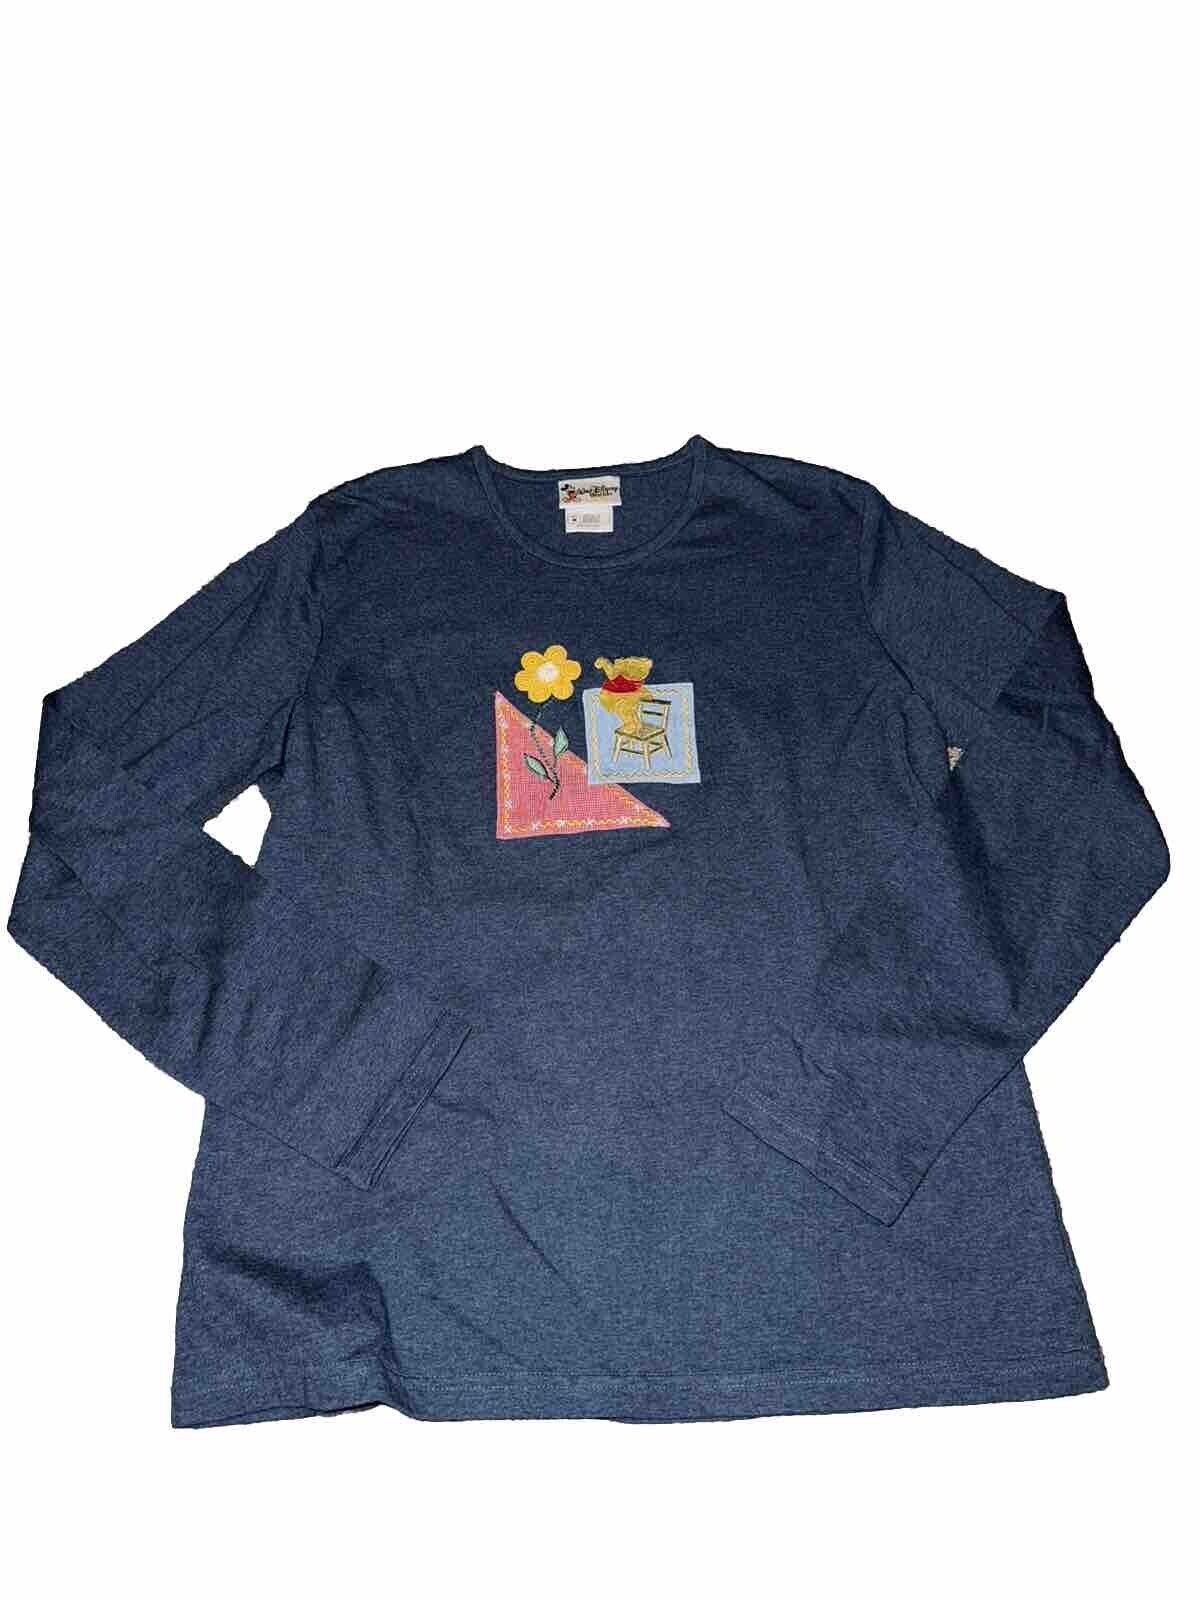 Vintage Disney World Winnie The Pooh Long Sleeve Embroidered T-Shirt Women’s Med